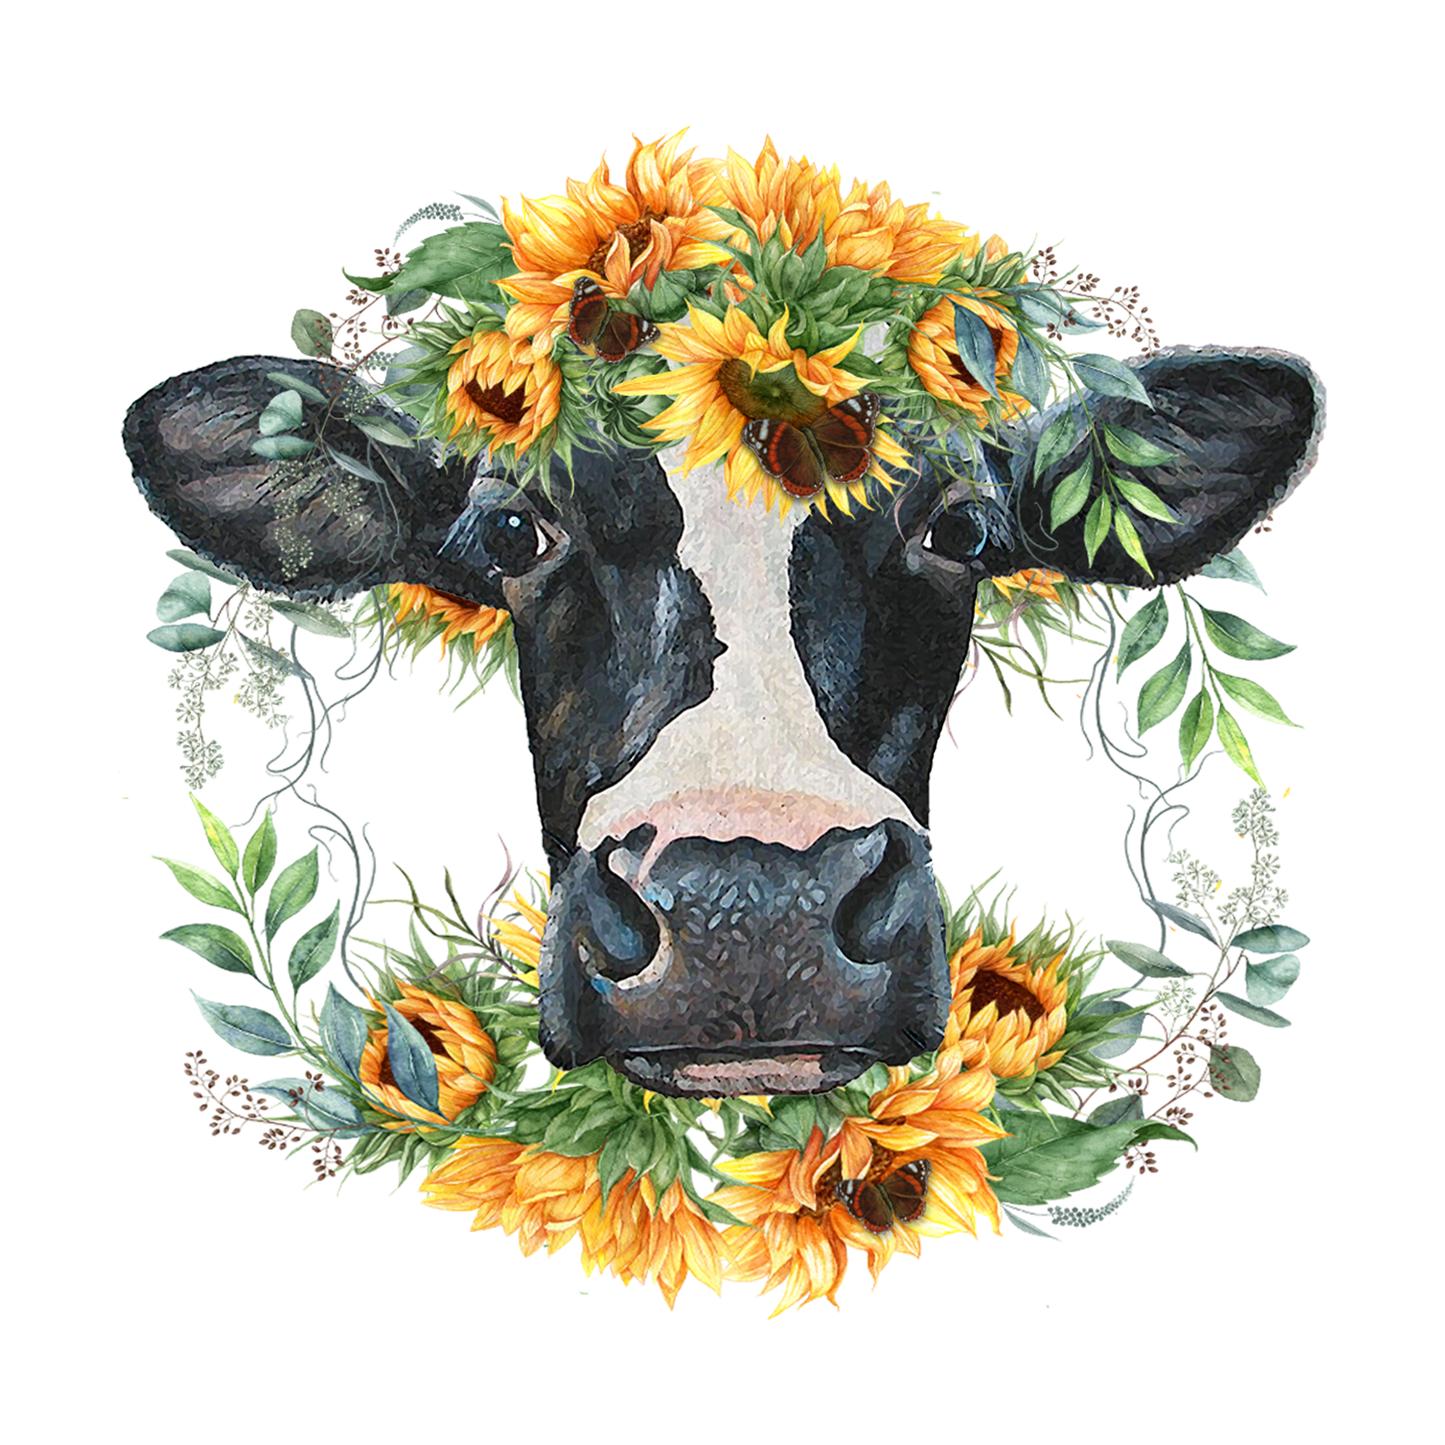 Black and White Cow with Sunflowers